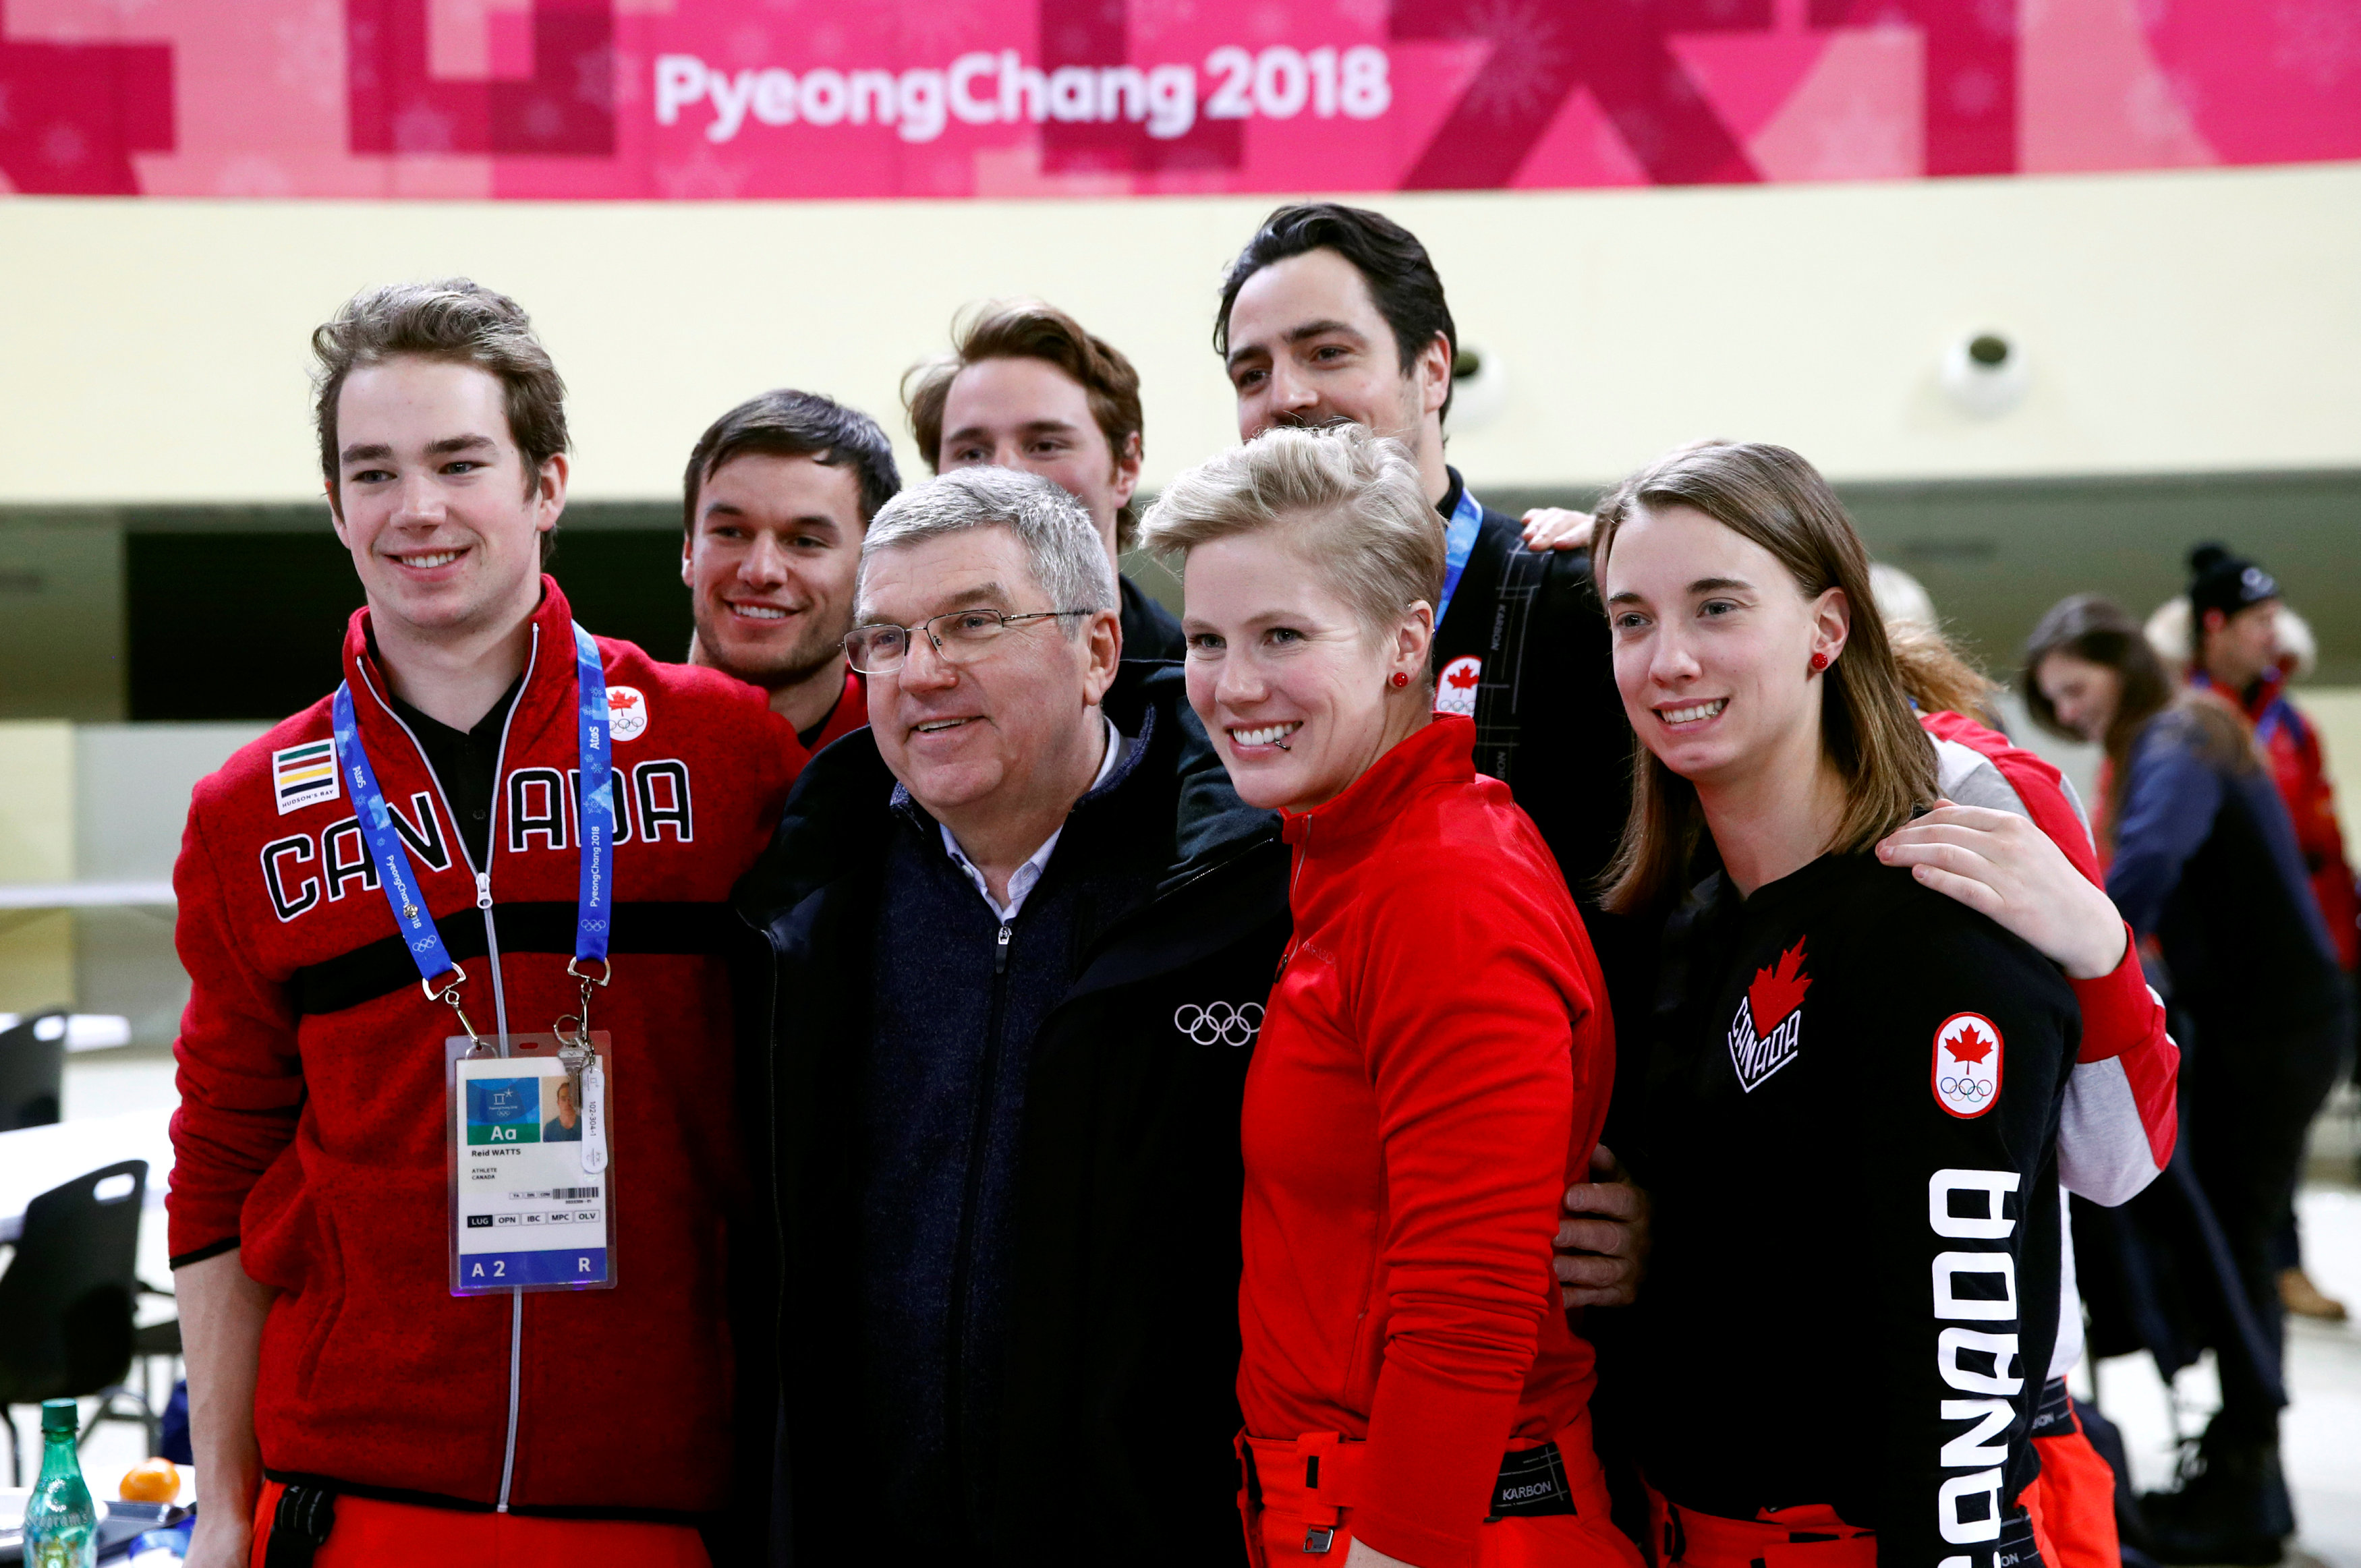 Bach hails North, South Korea for harnessing Olympic spirit